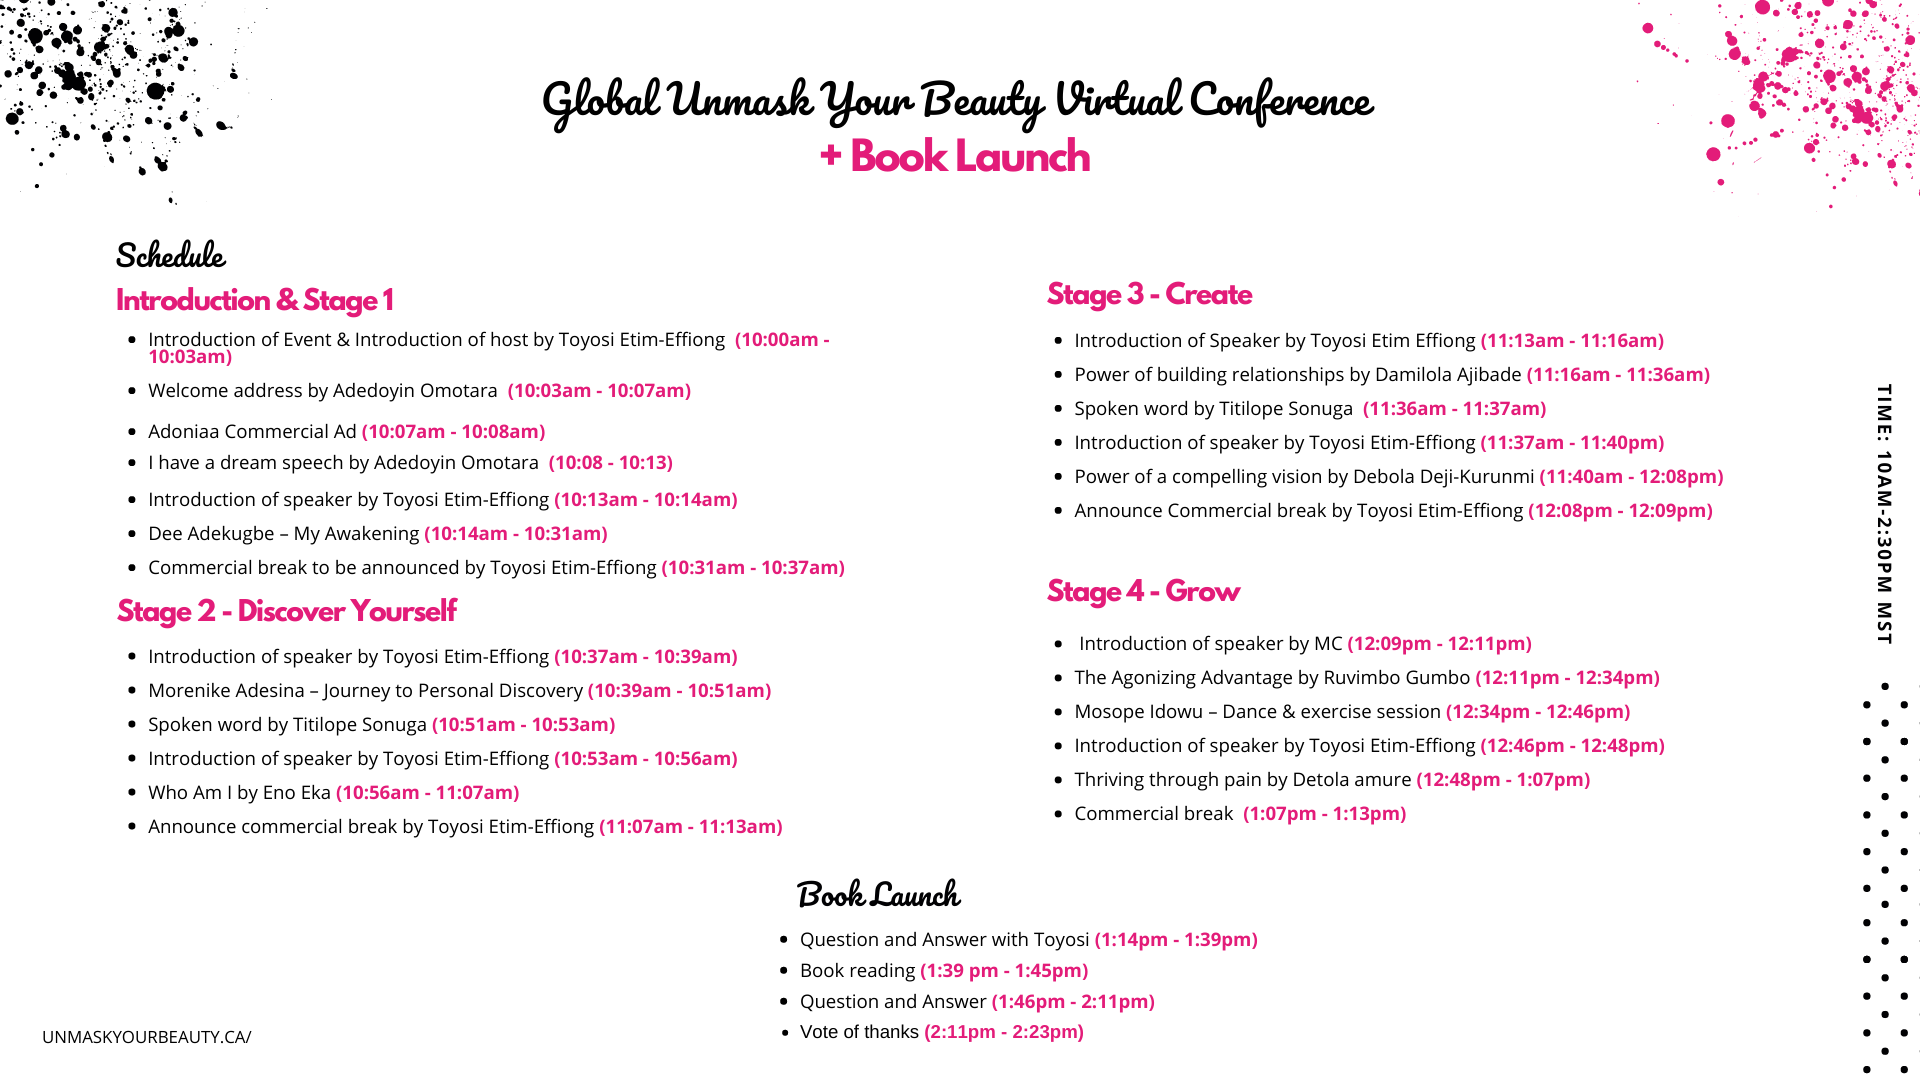 Photo for Global Unmask Your Beauty Conference & Book Launch on ViewStub